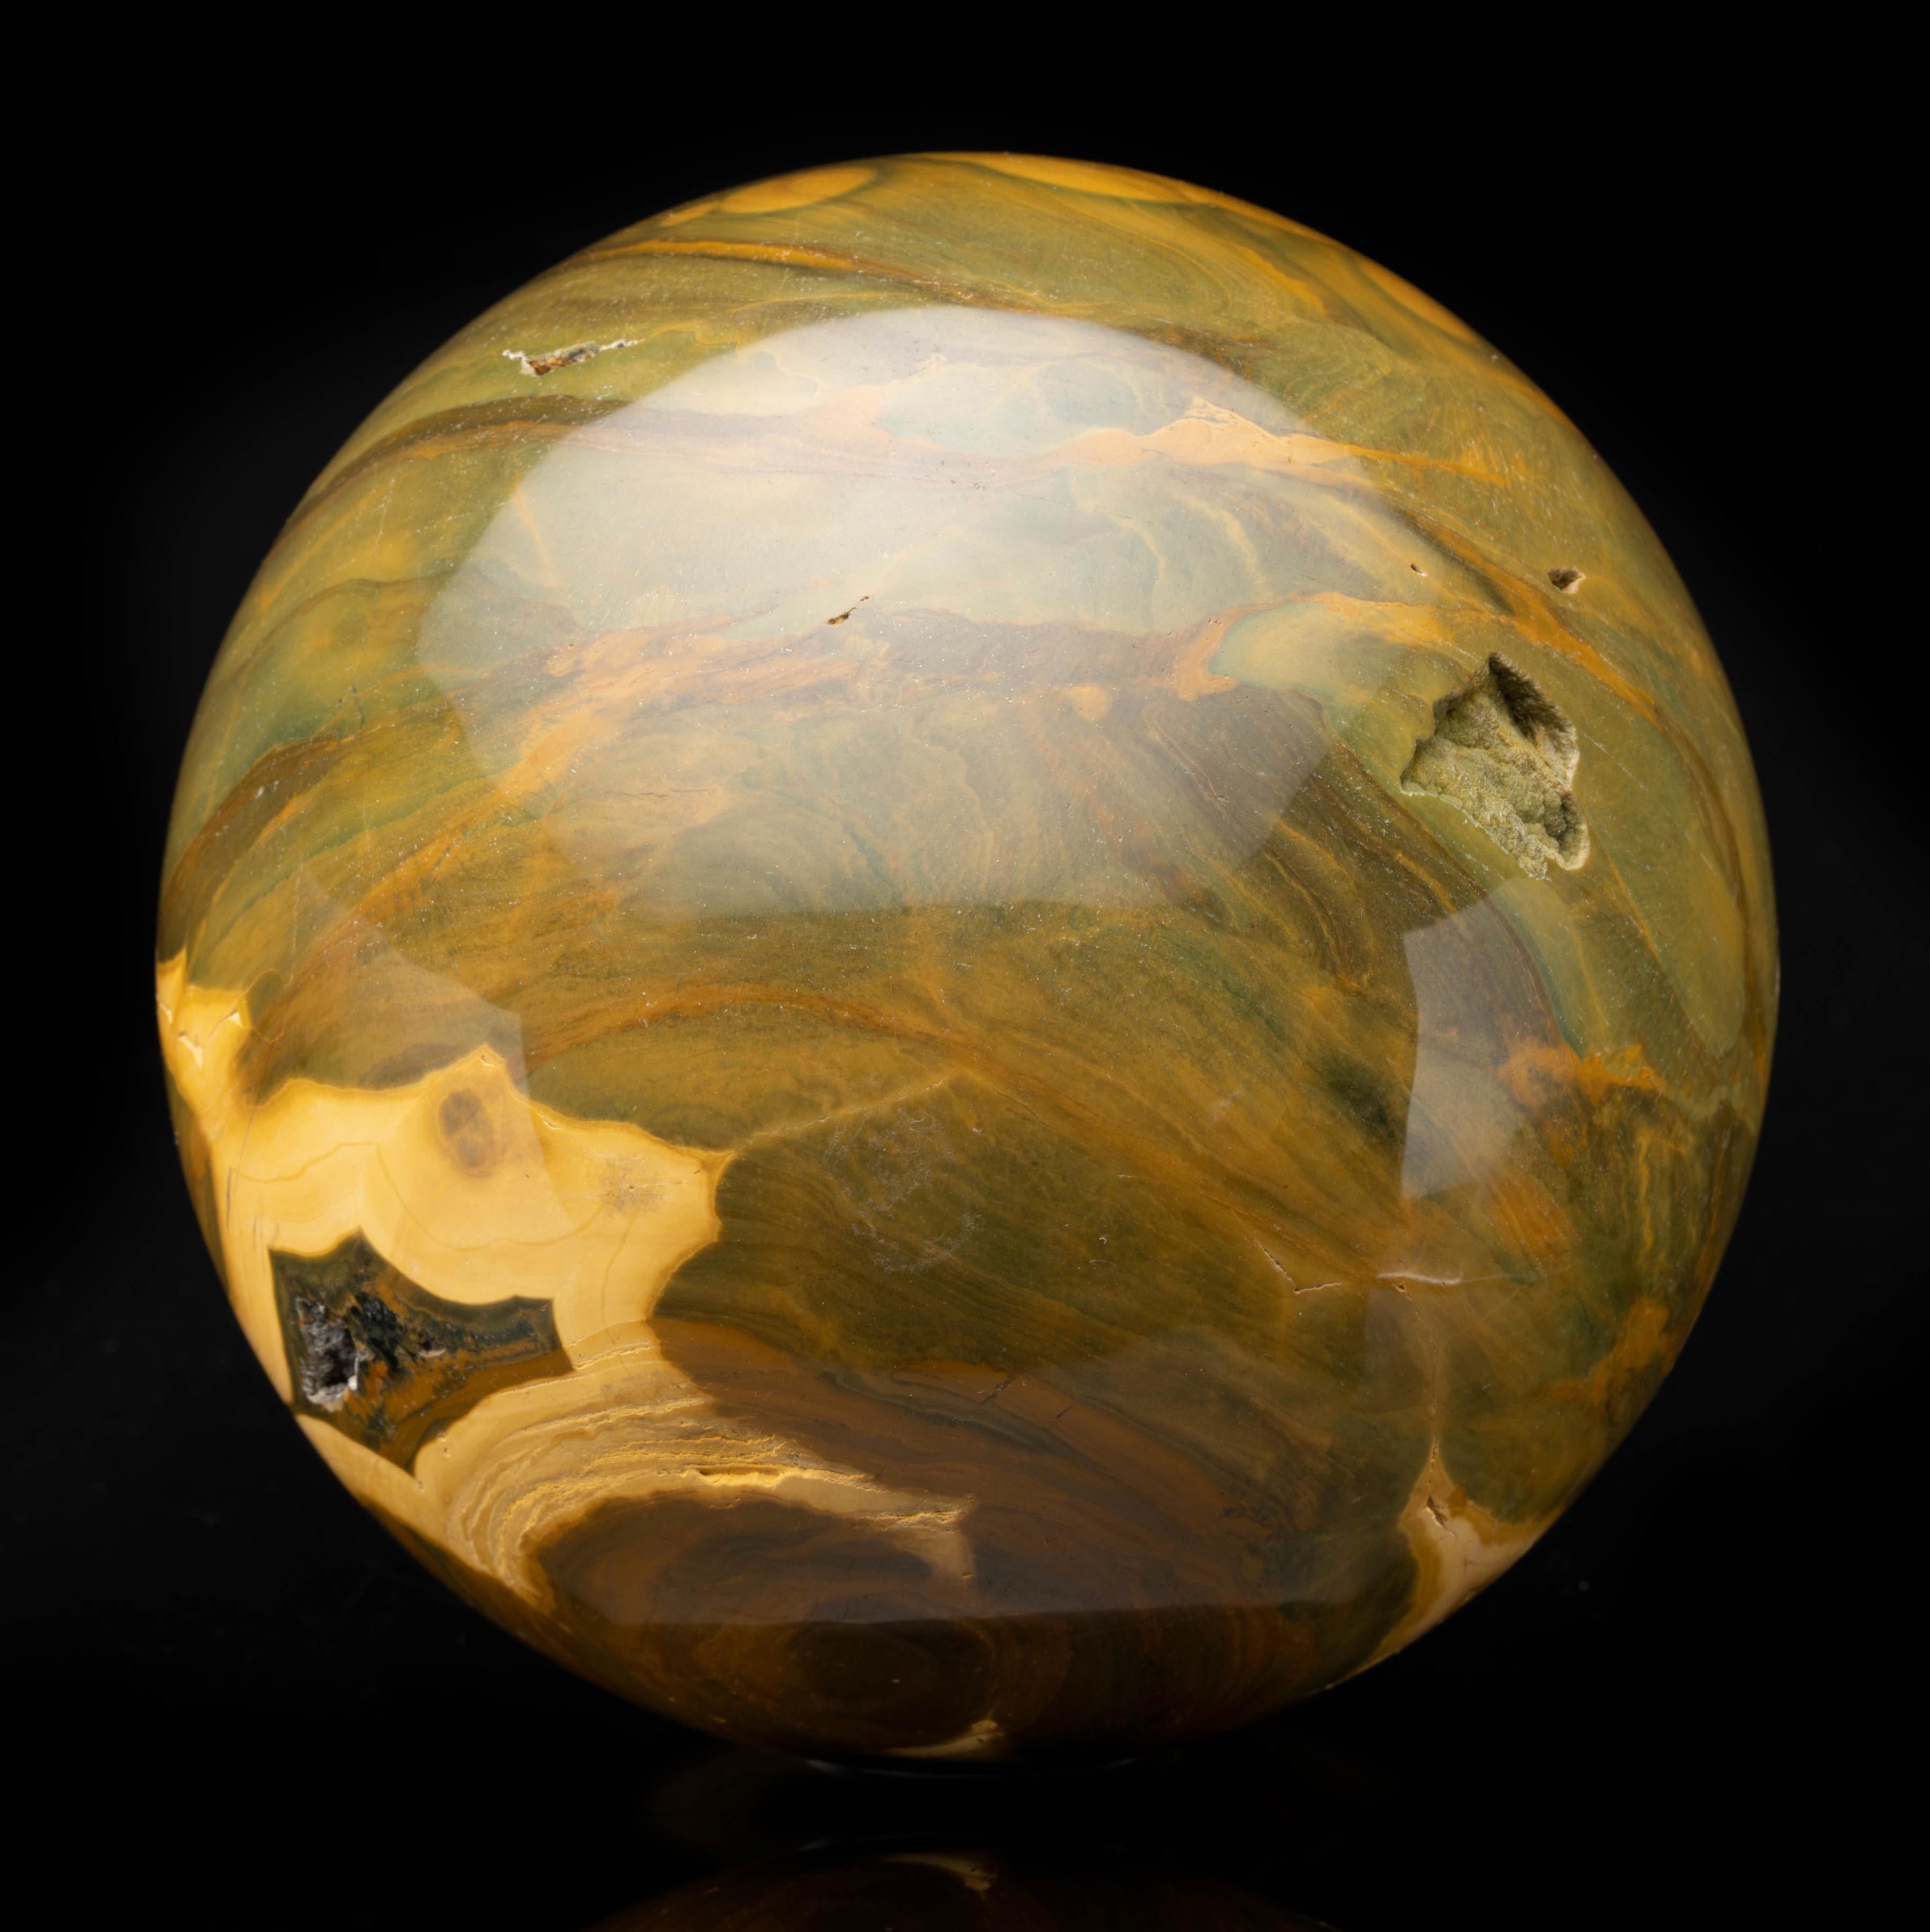 This rare variety of Jasper is known for small, orb-like markings and often boasts vivid natural patterns in a rainbow of colors. This 3.96-pound piece from Madagascar where much of this species is sourced boasts exceptionally large and symmetrical